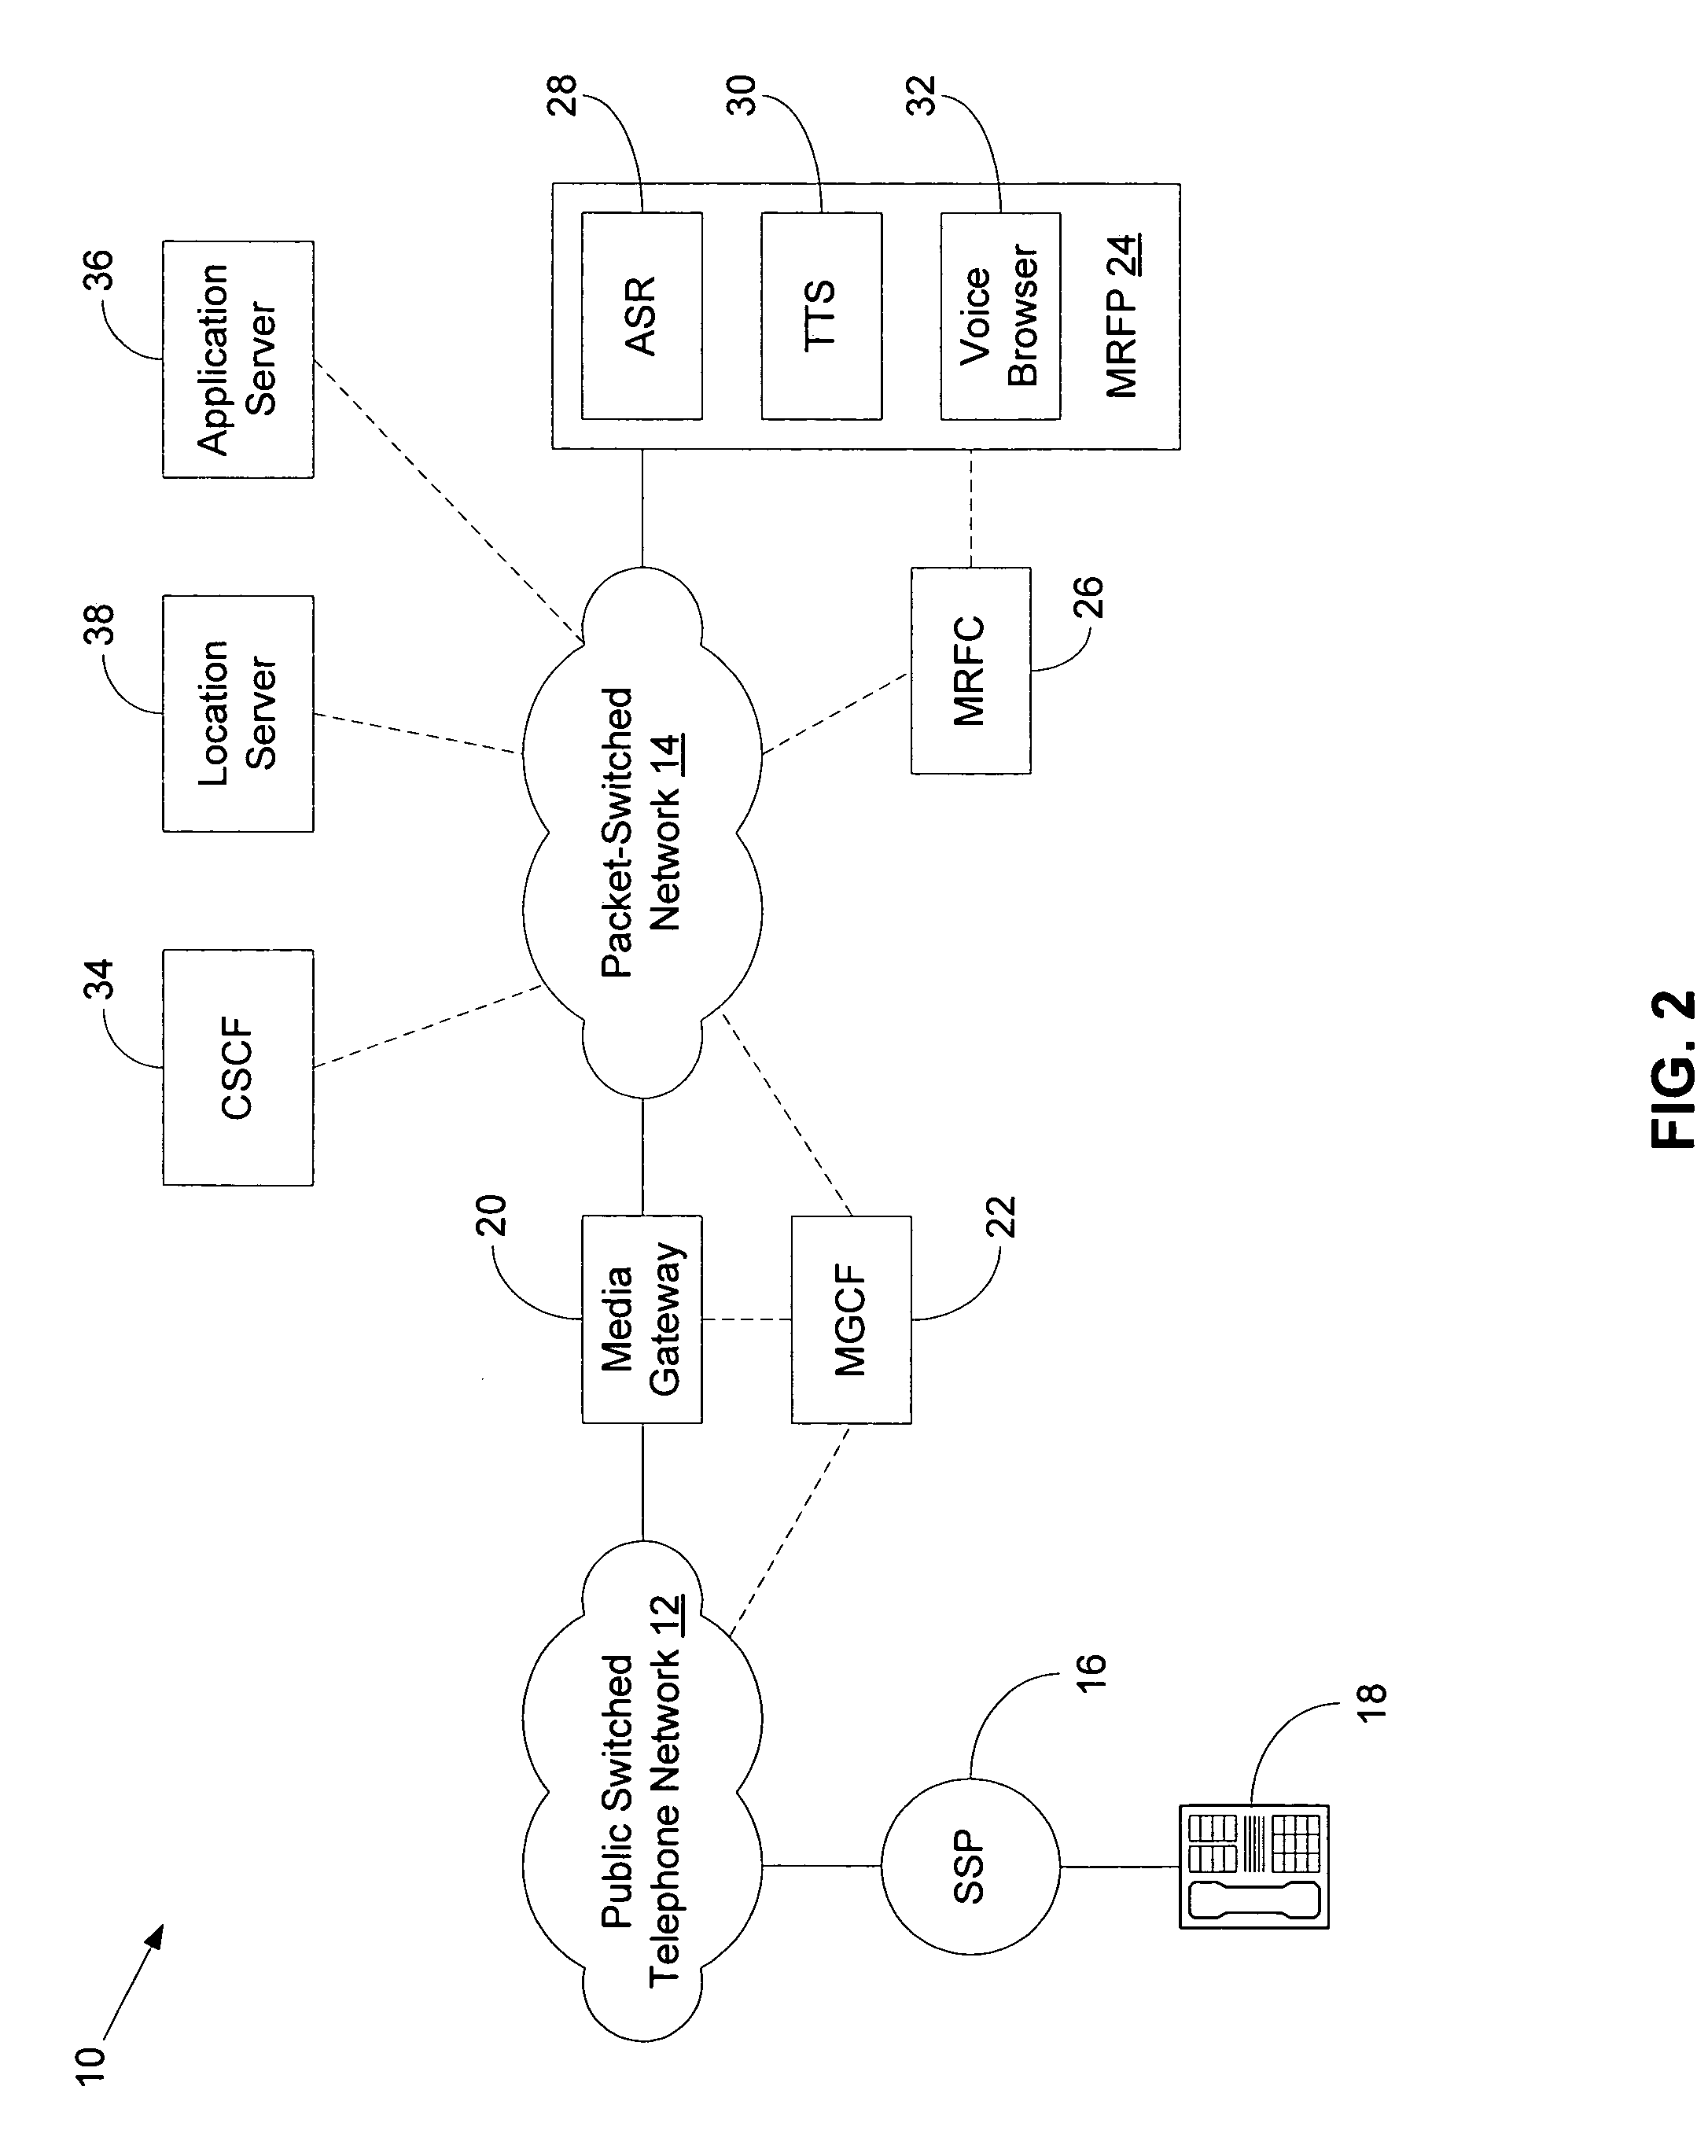 IMS-based interactive media system and method